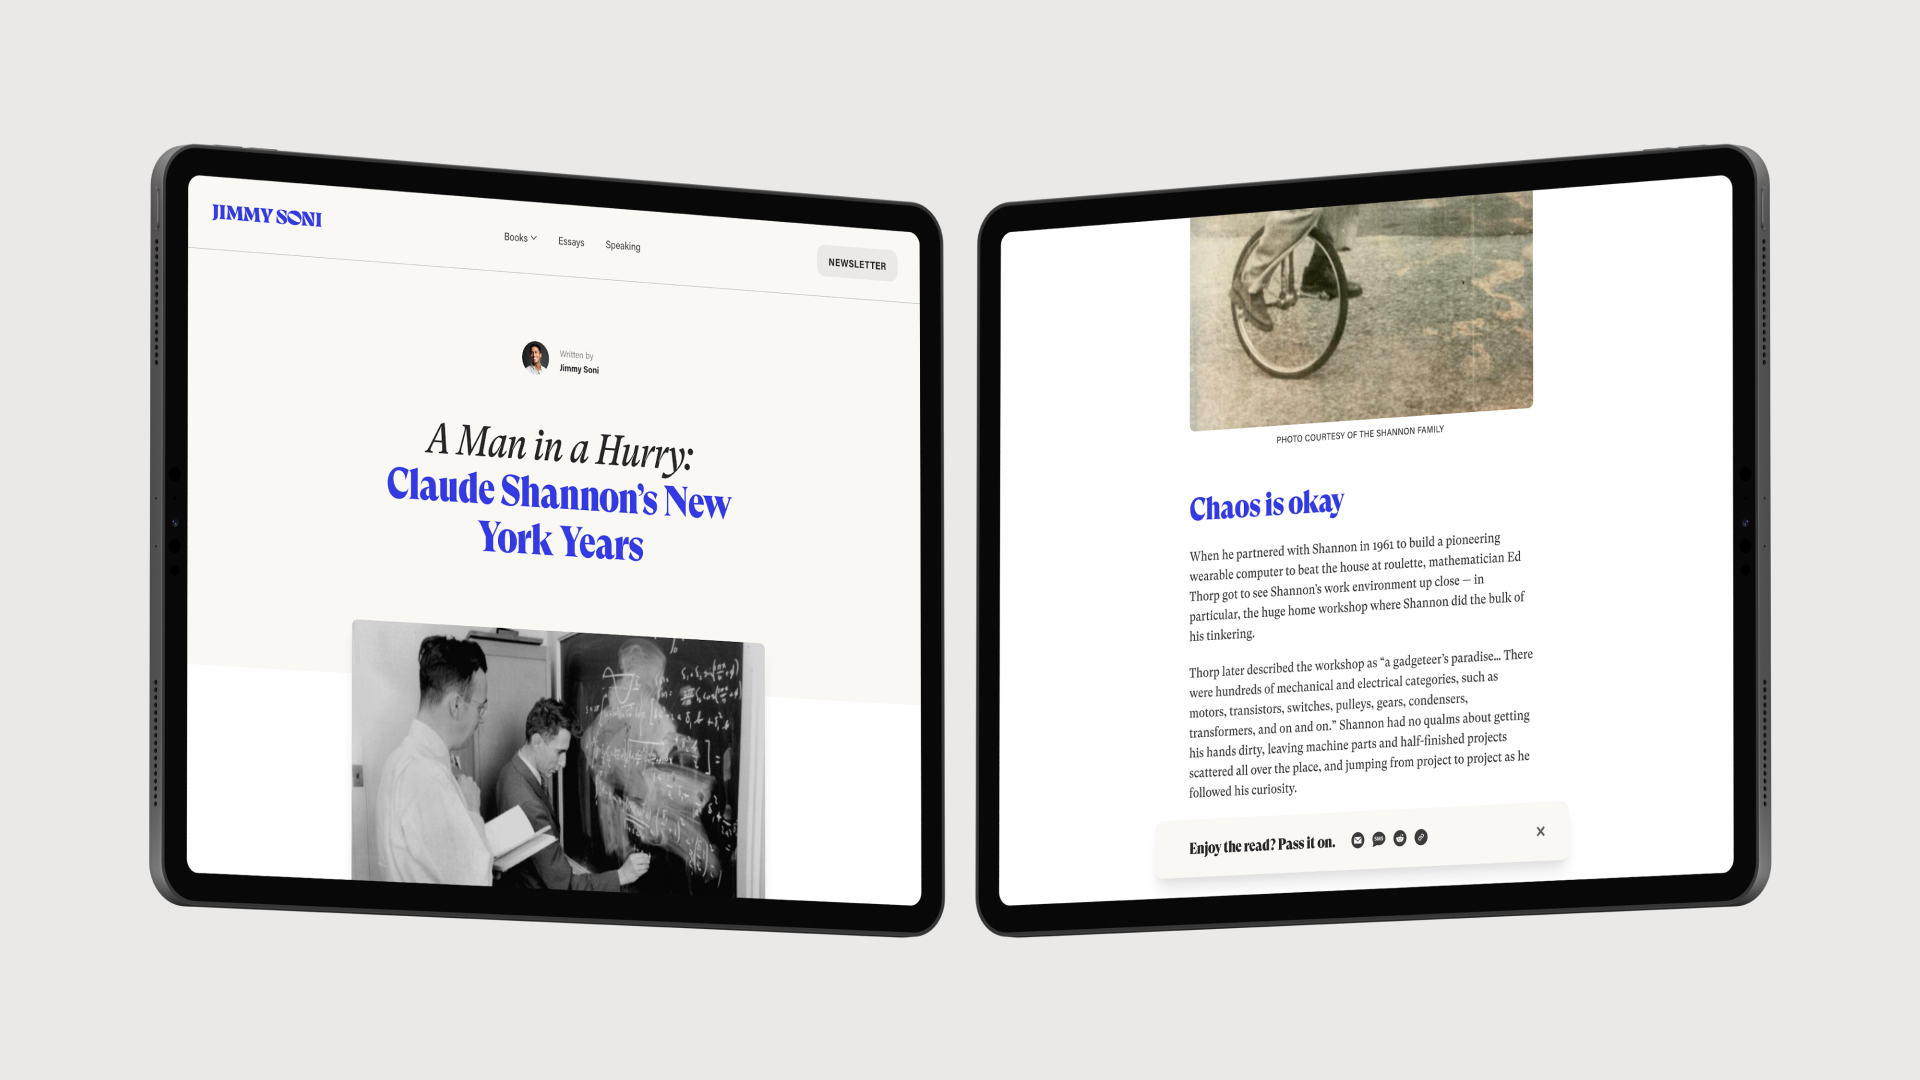 iPads showing sections of a blog post about Claude Shannon